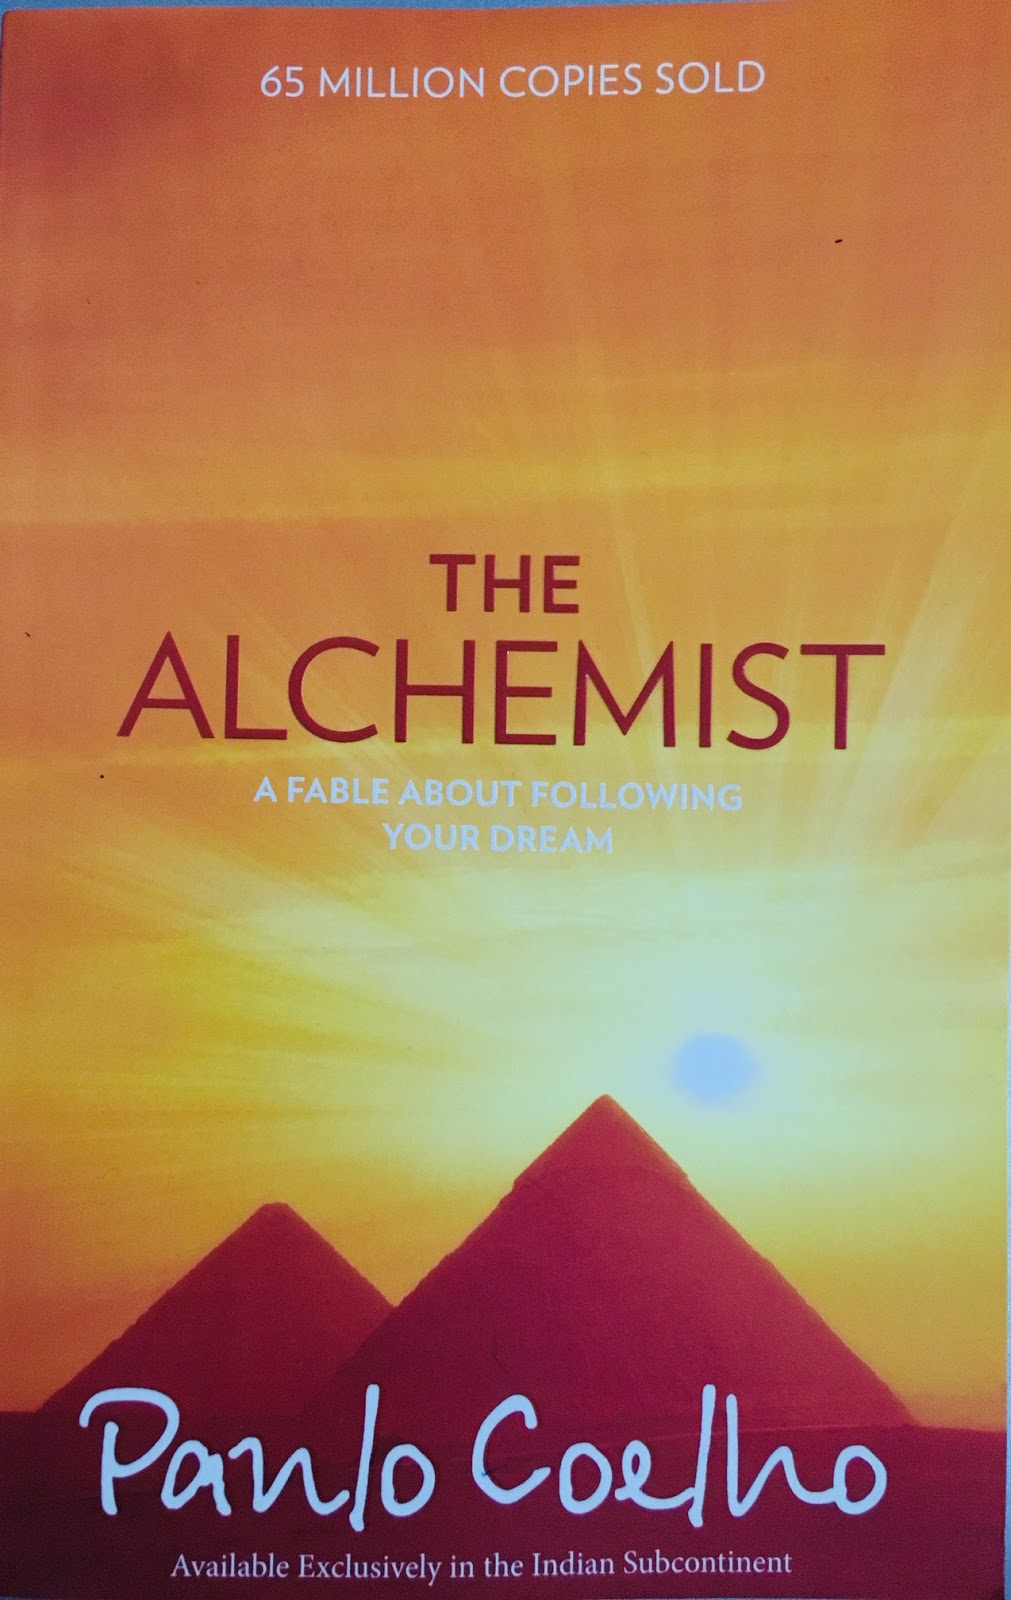 book review of alchemist in 100 words